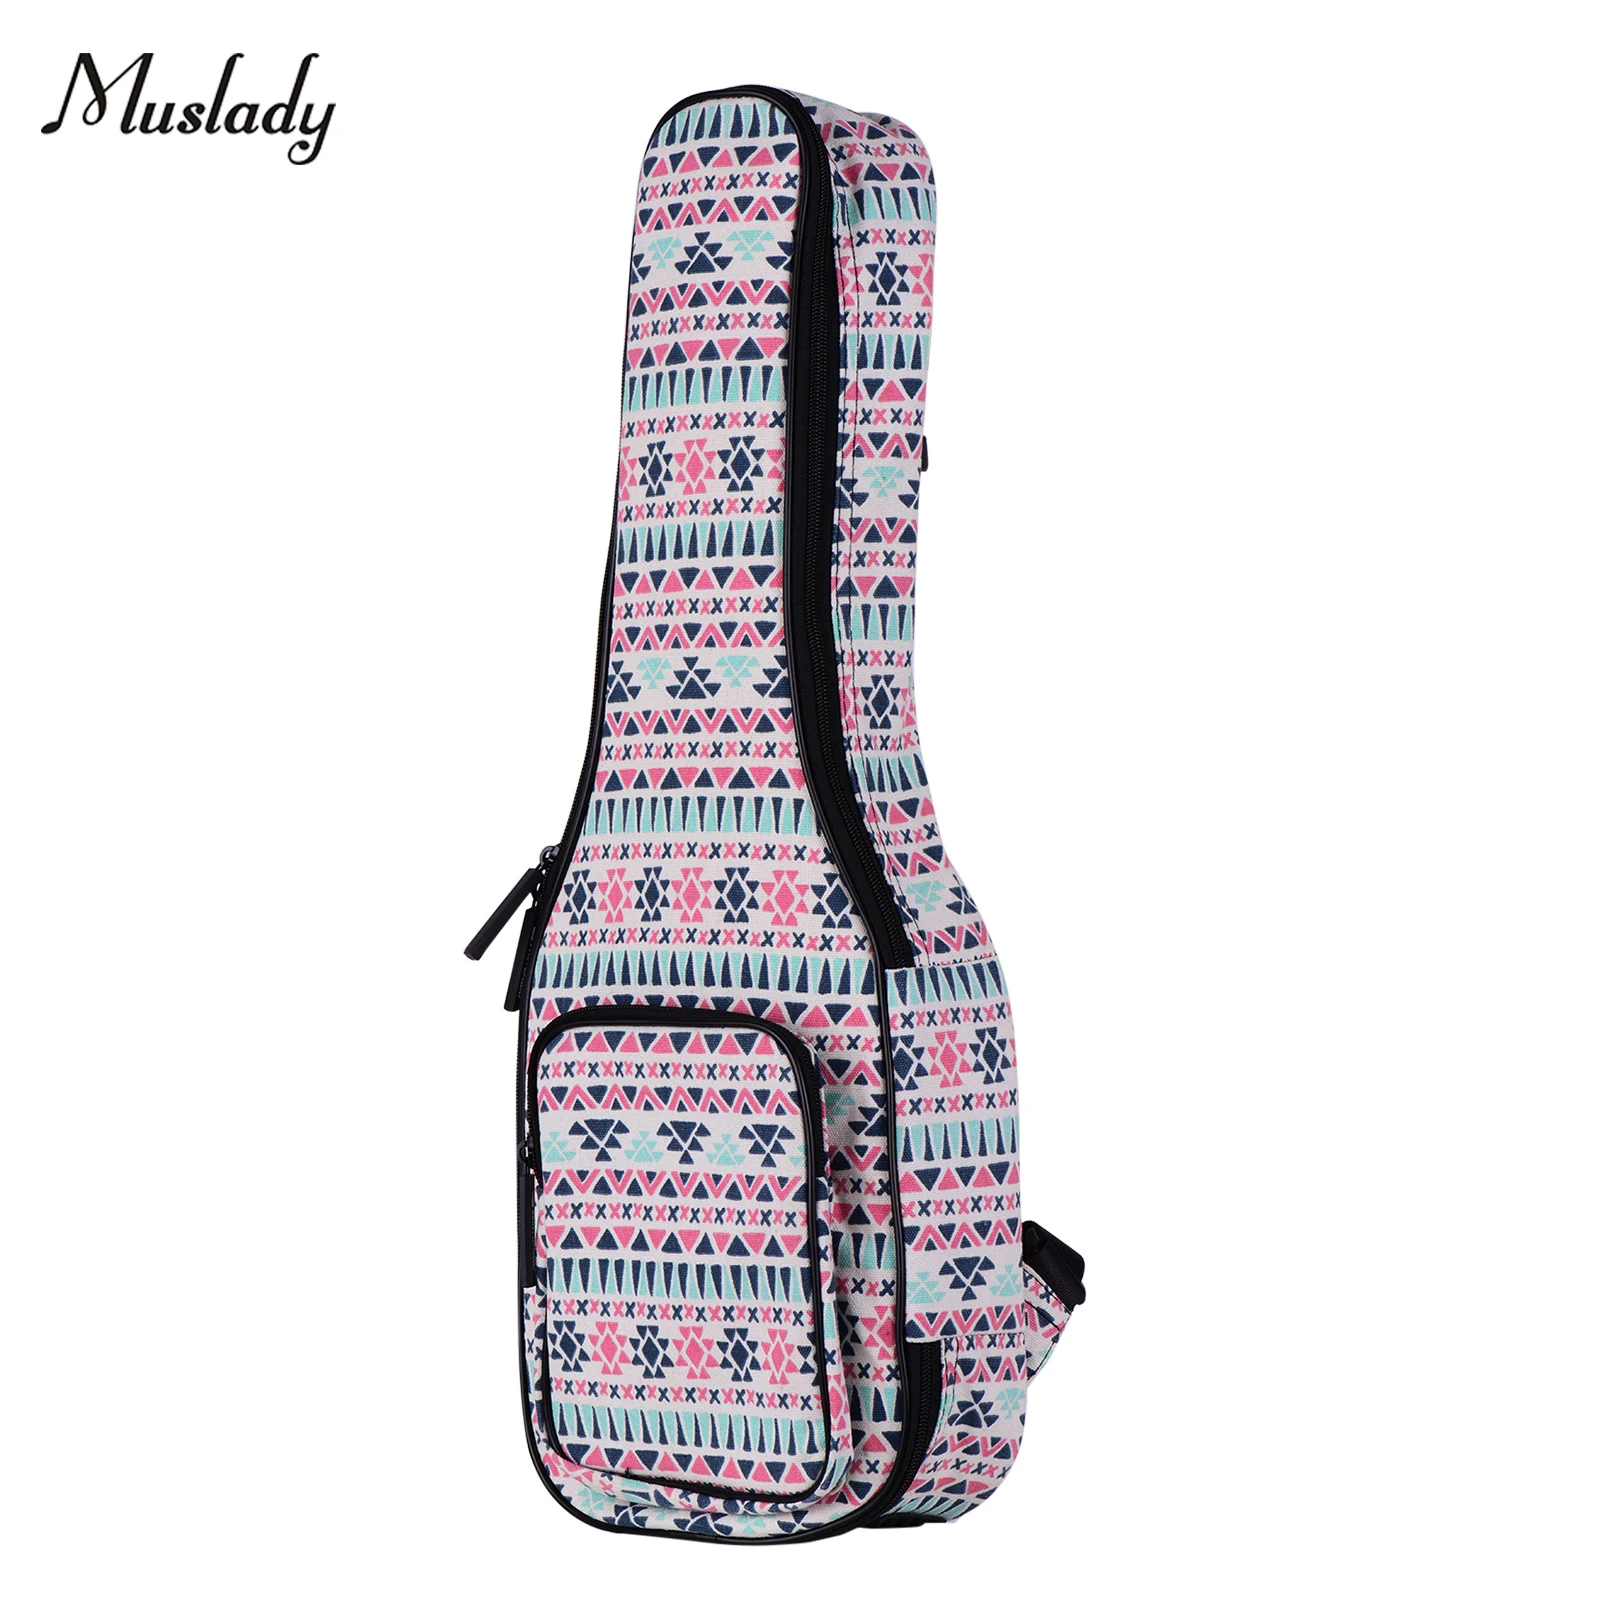 

Muslady Concert Ukulele Gig Bag 23 Inch Stylish Padded Cotton Backpack Carrying Case with Flannelette Lining